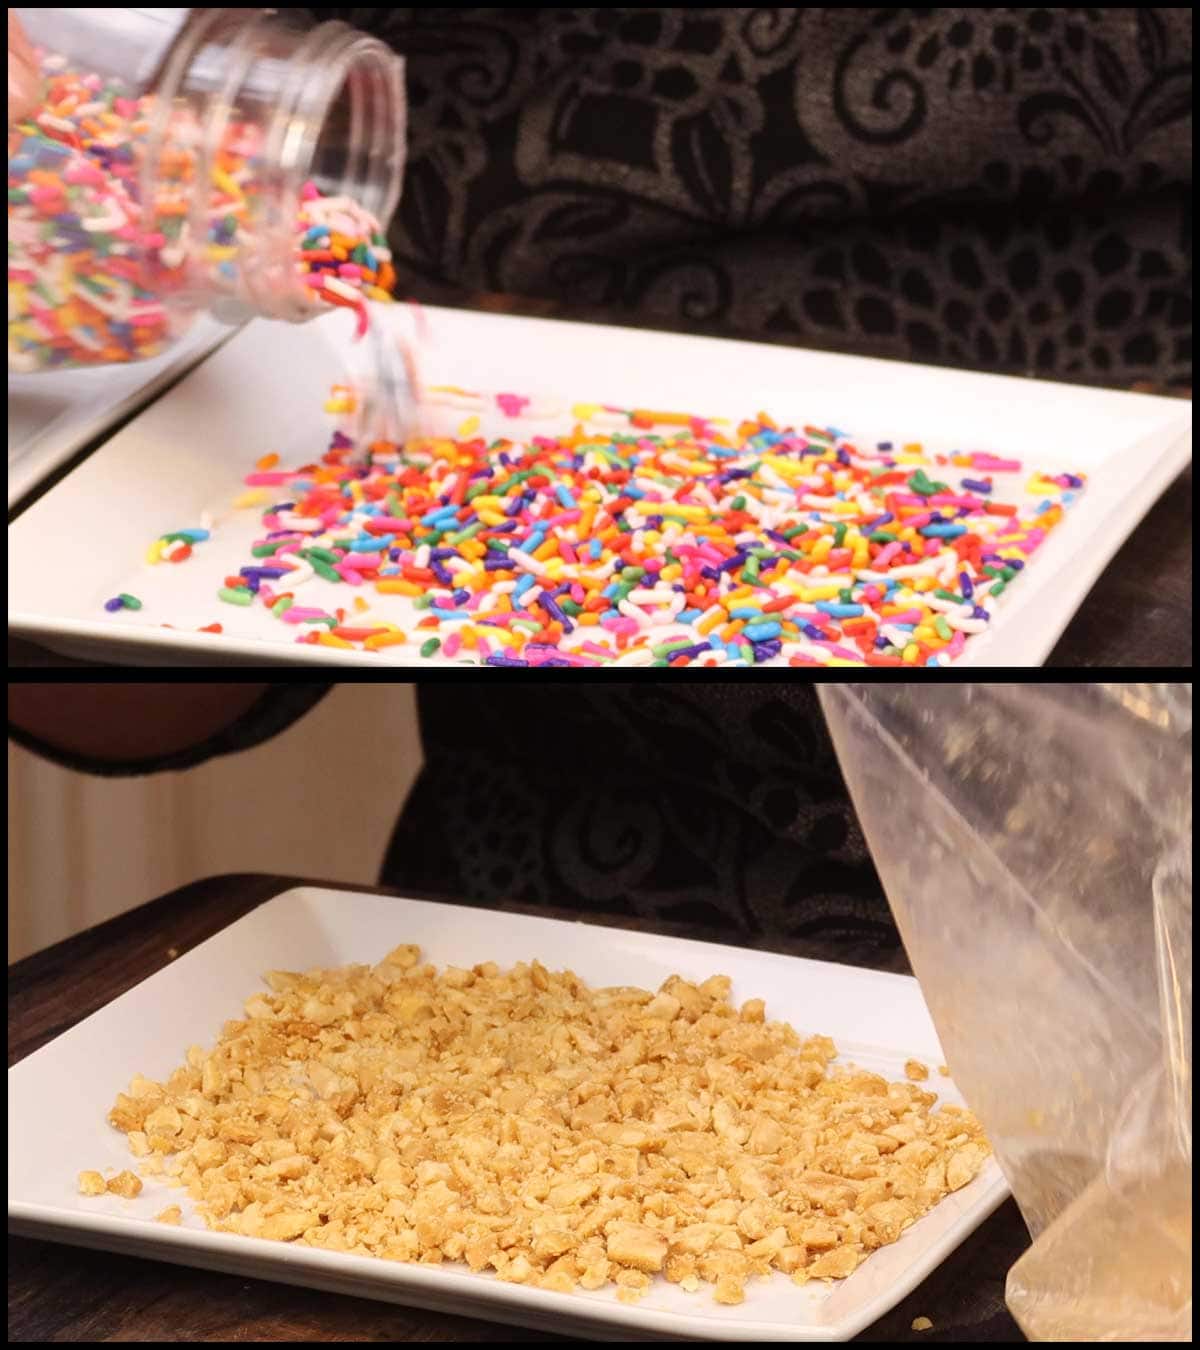 crushed nuts and sprinkles on plates for decorating homemade caramel apples